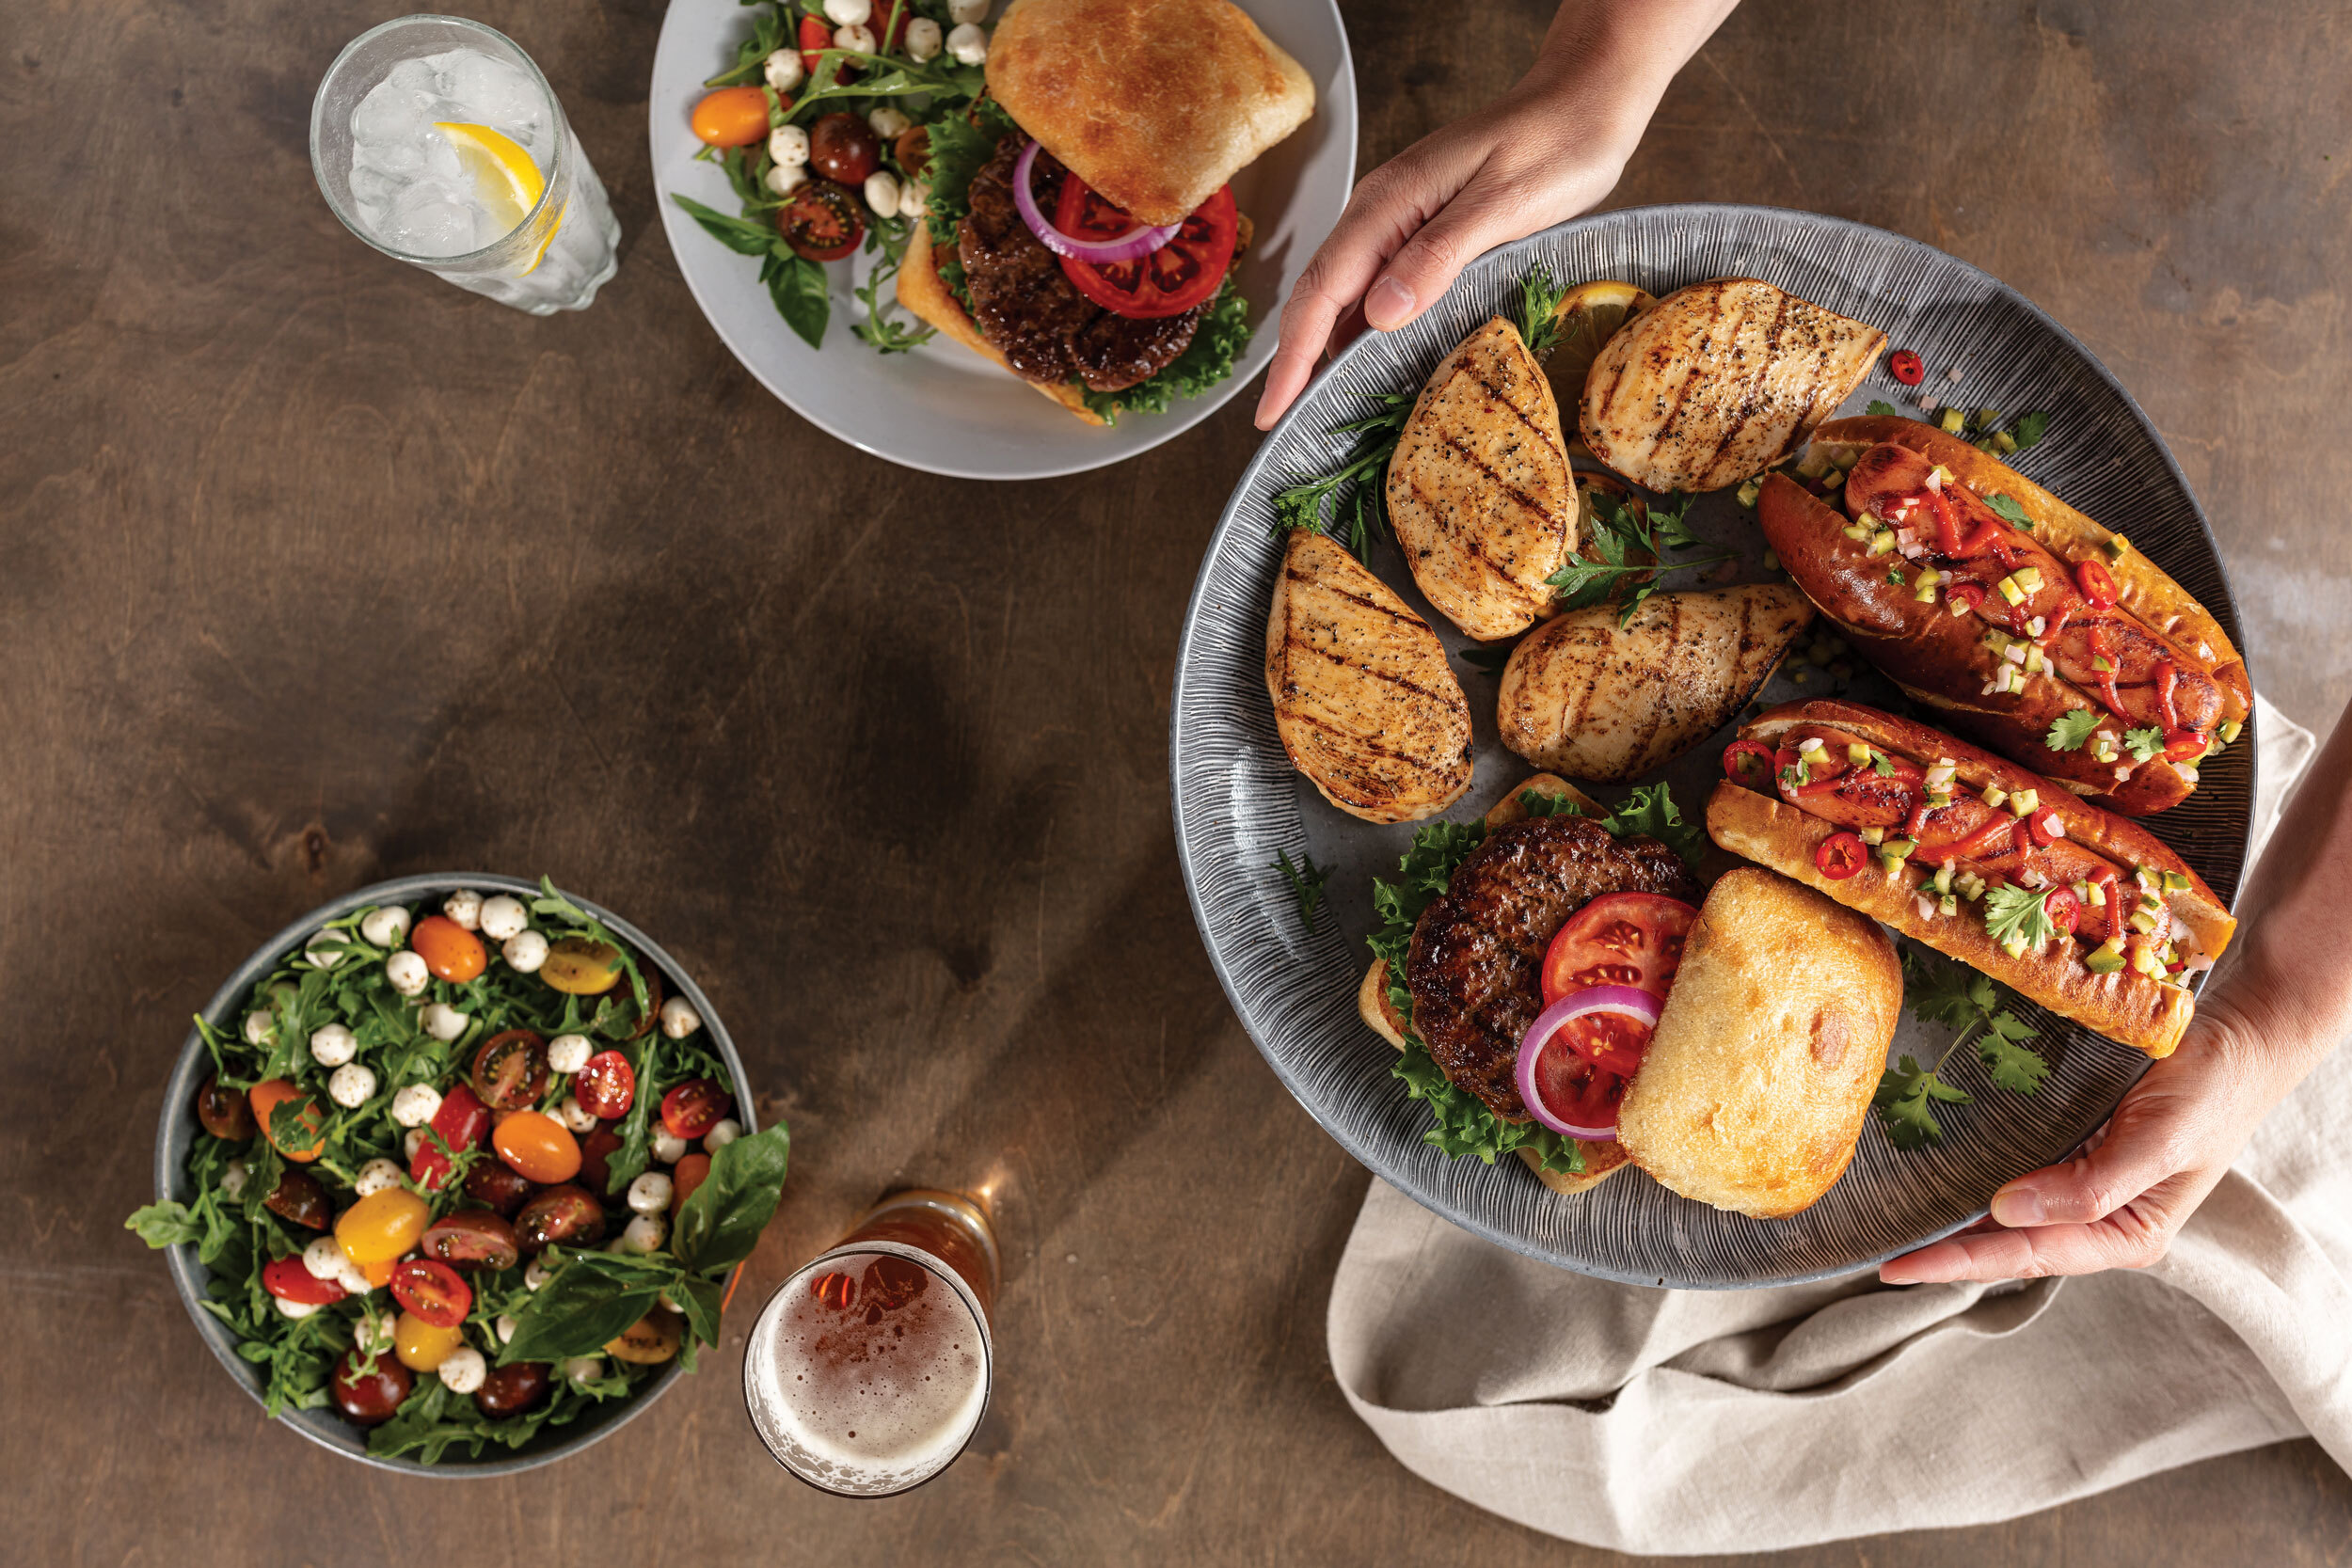 https://blog-content.omahasteaks.com/wp-content/uploads/2022/06/how-to-fight-shrinkflation-at-the-grocery-store-with-Omaha-Steaks.jpg